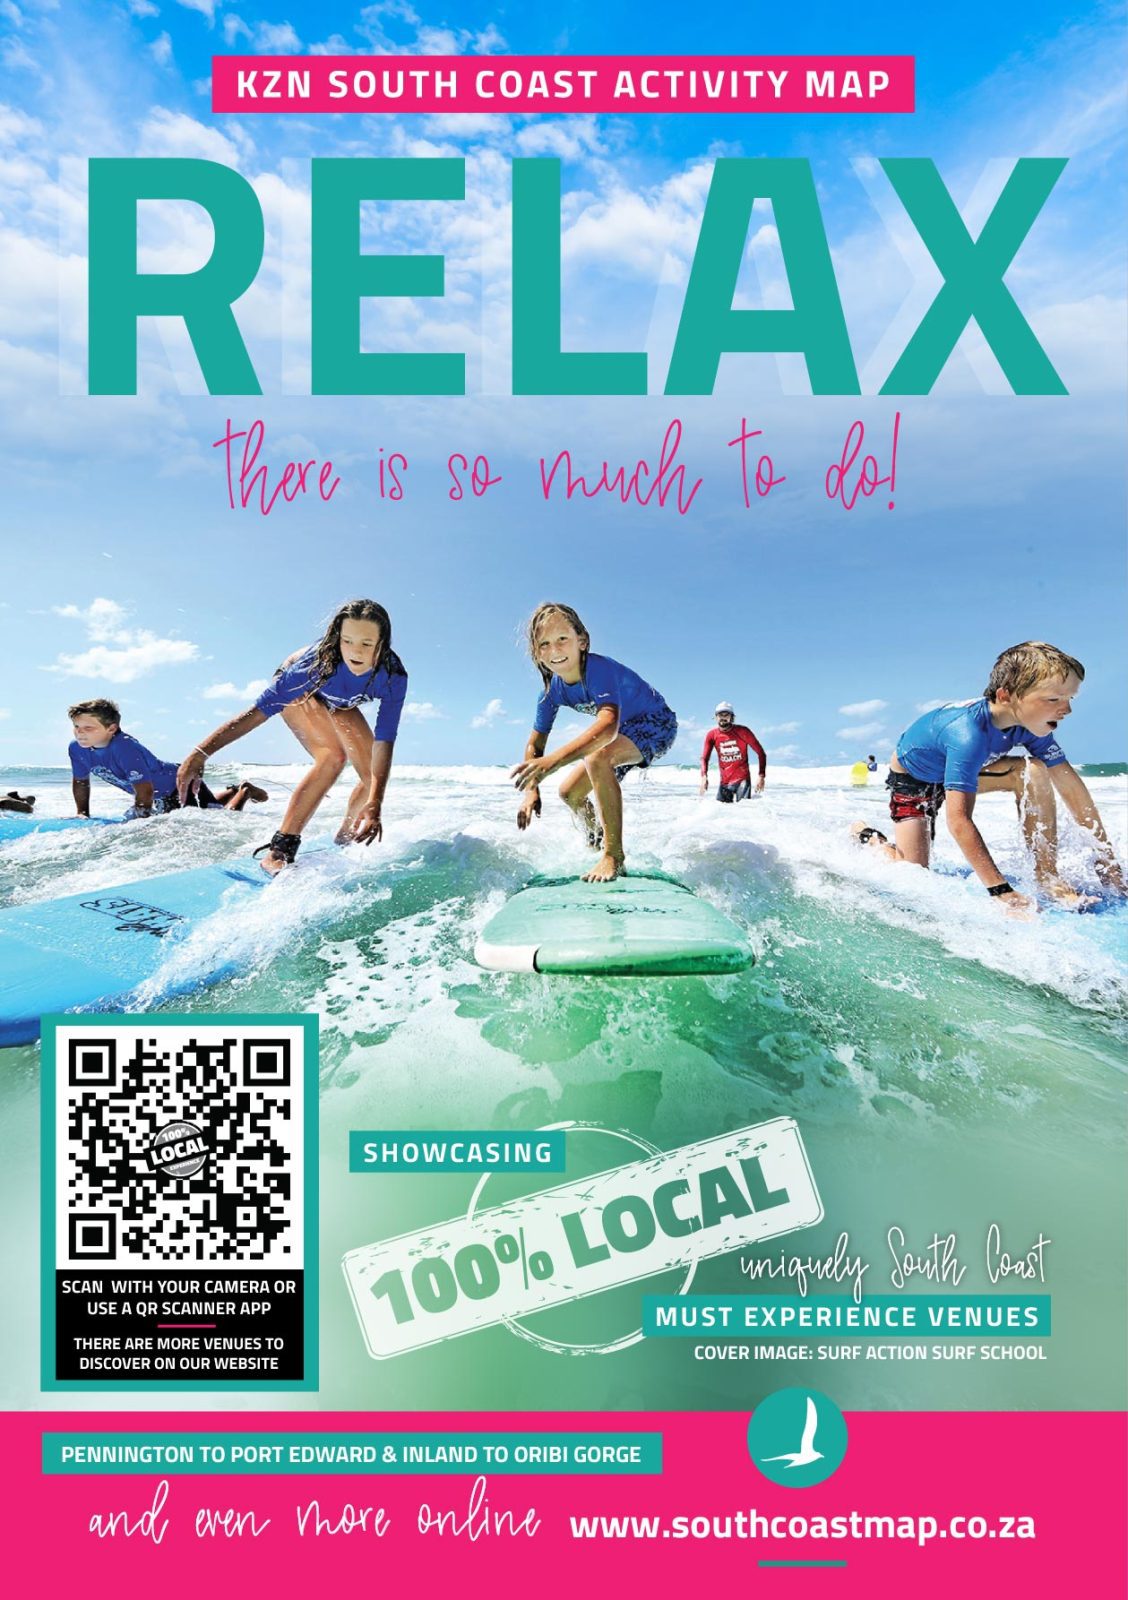 Relax South Coast Activity Map Things to do